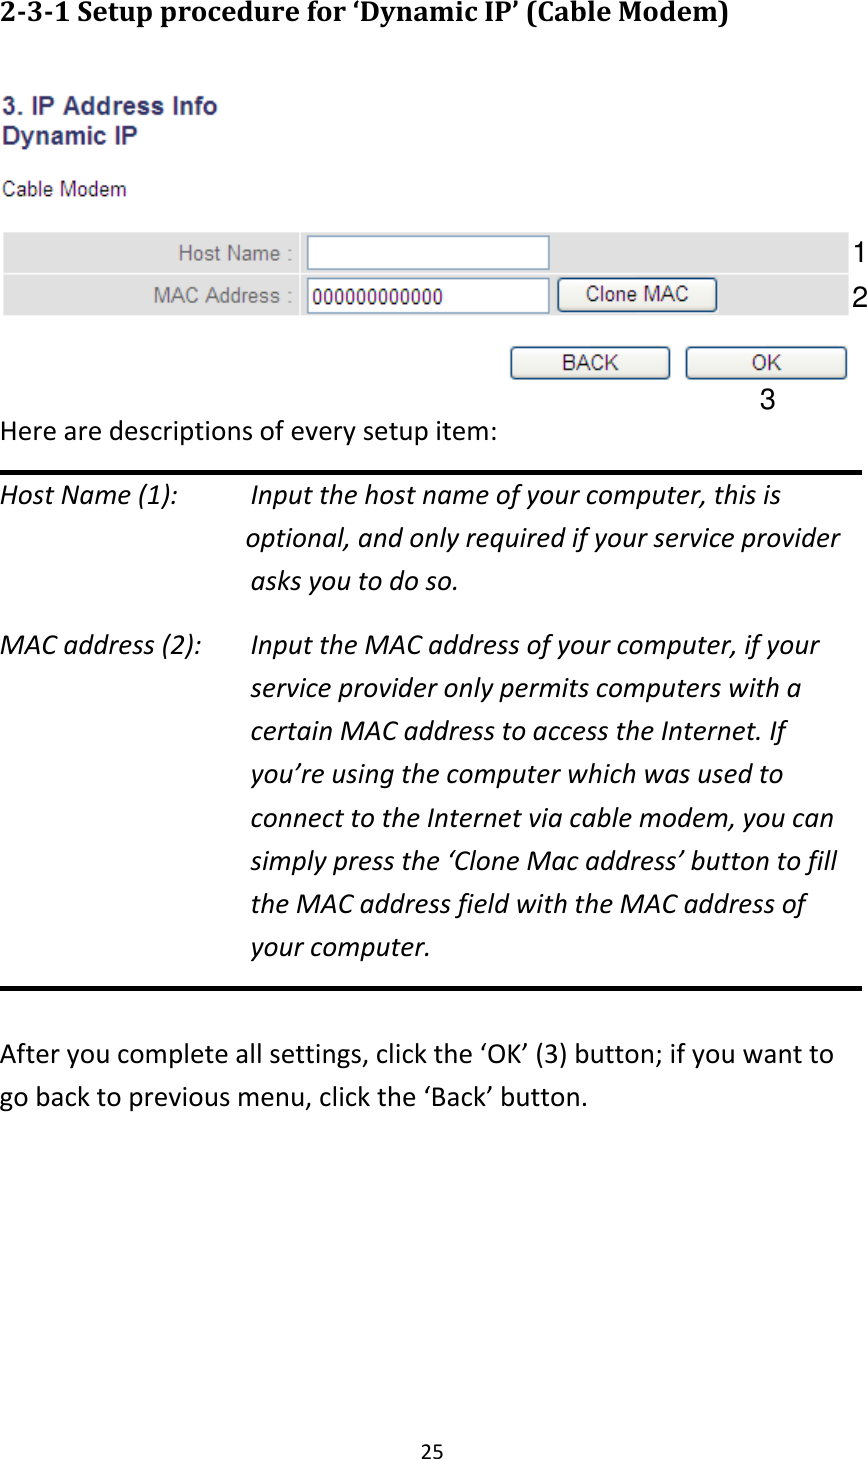 25 2-3-1 Setup procedure for ‘Dynamic IP’ (Cable Modem)   Here are descriptions of every setup item: Host Name (1):     Input the host name of your computer, this is                         optional, and only required if your service provider             asks you to do so.   MAC address (2):    Input the MAC address of your computer, if your service provider only permits computers with a certain MAC address to access the Internet. If you’re using the computer which was used to connect to the Internet via cable modem, you can simply press the ‘Clone Mac address’ button to fill the MAC address field with the MAC address of your computer.  After you complete all settings, click the ‘OK’ (3) button; if you want to go back to previous menu, click the ‘Back’ button.   1 2 3 